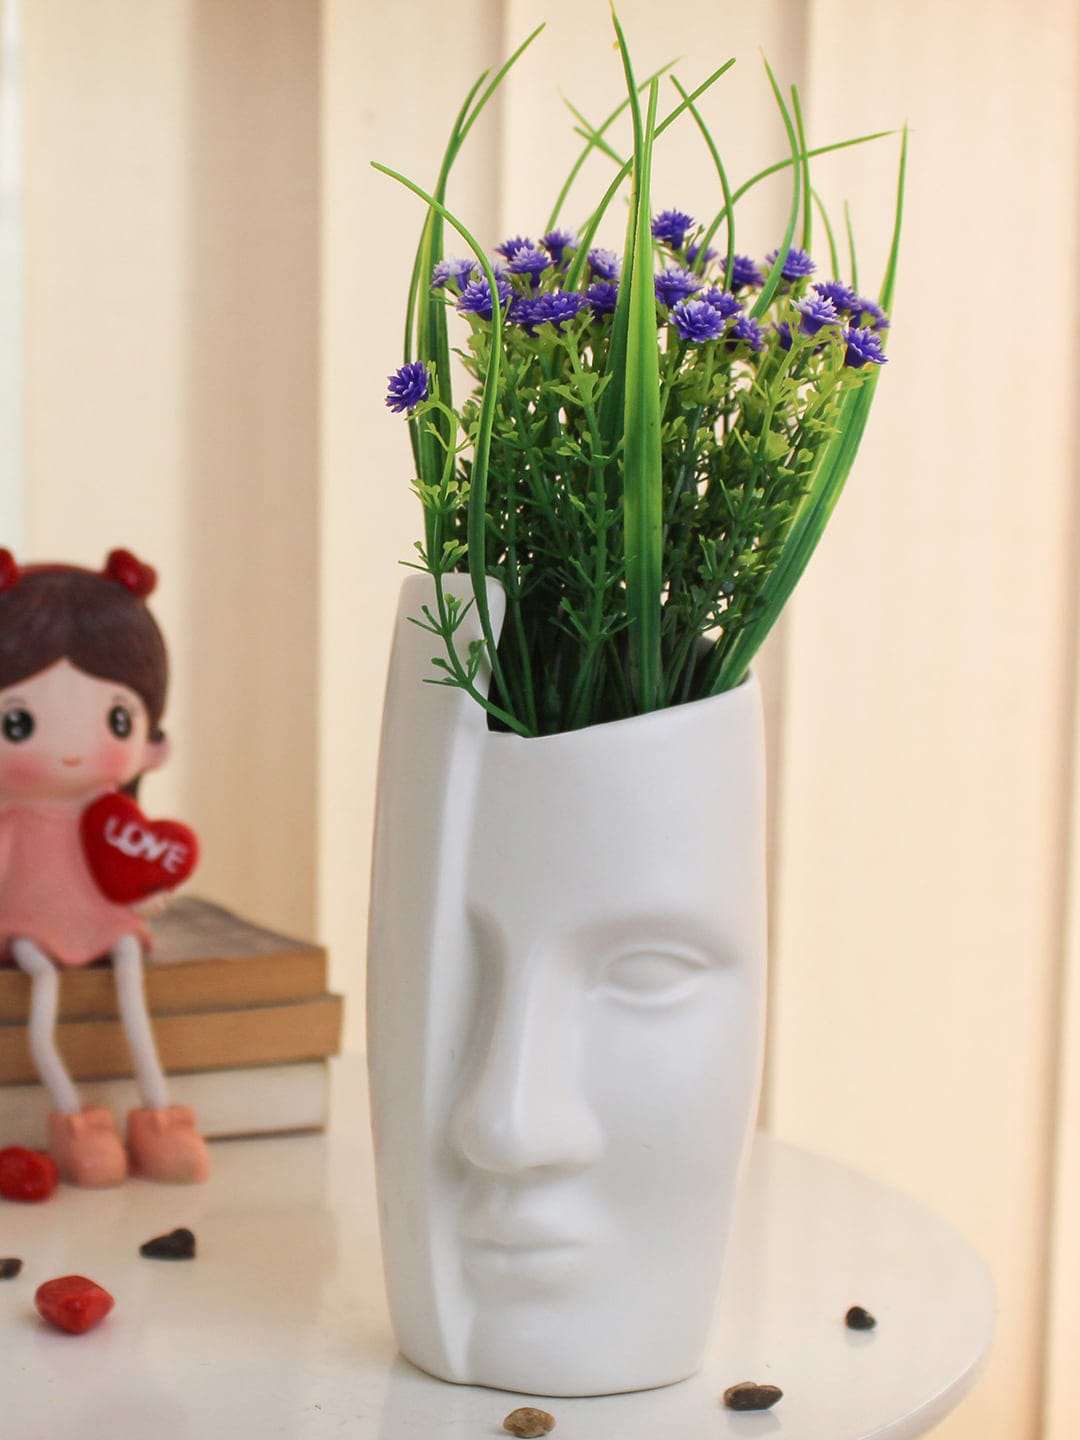 TIED RIBBONS Blue & White Artificial Gypsophila Flowers Plant With Face Pot Vase Price in India